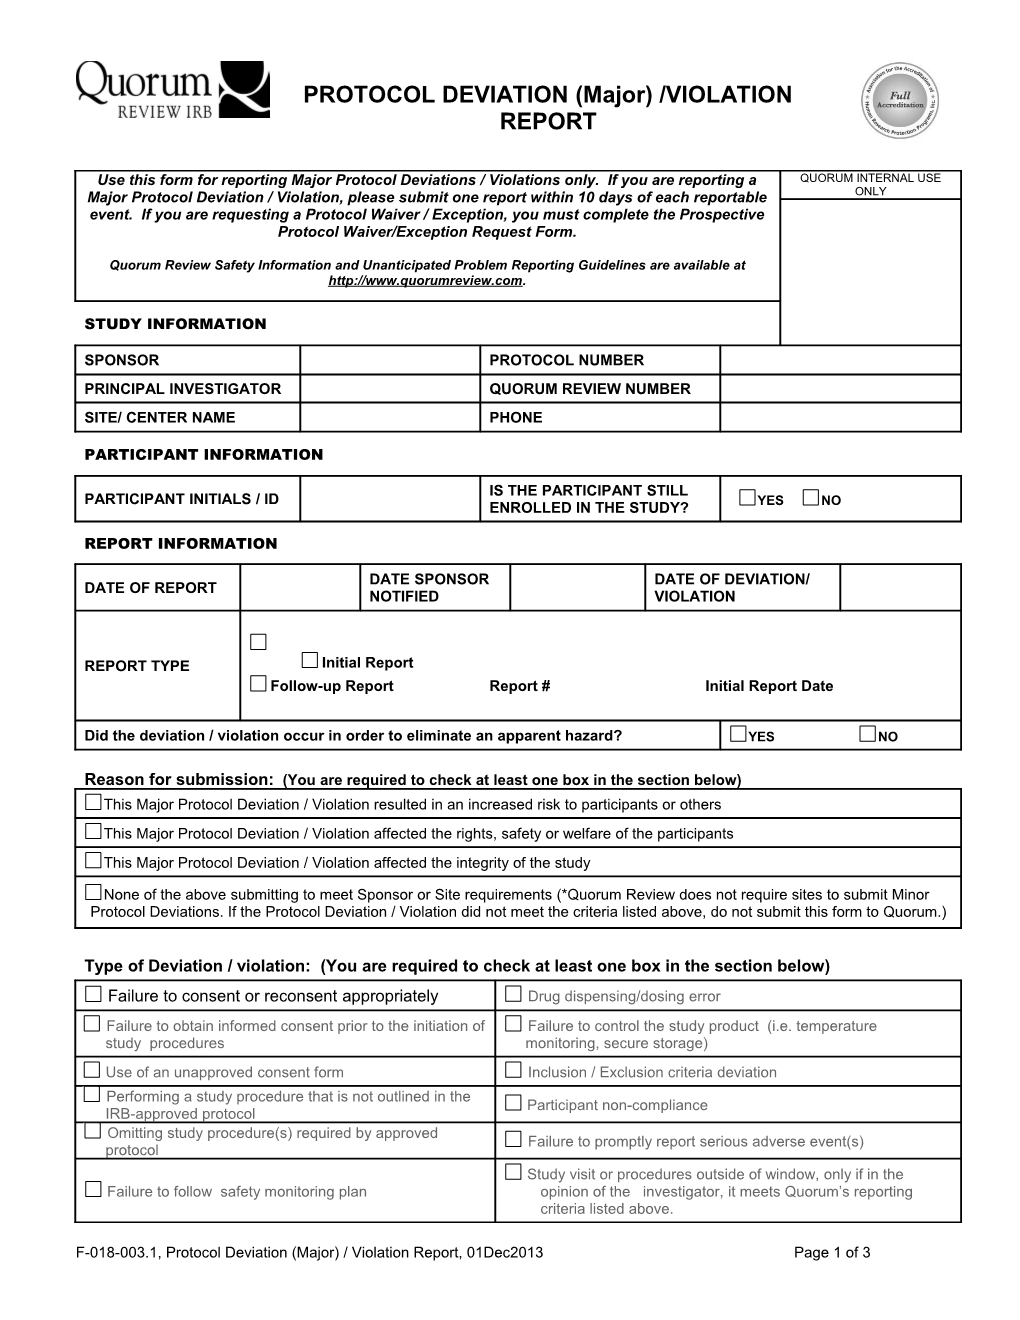 Use This Form for Reporting Major Protocol Deviations / Violations and for Requests For